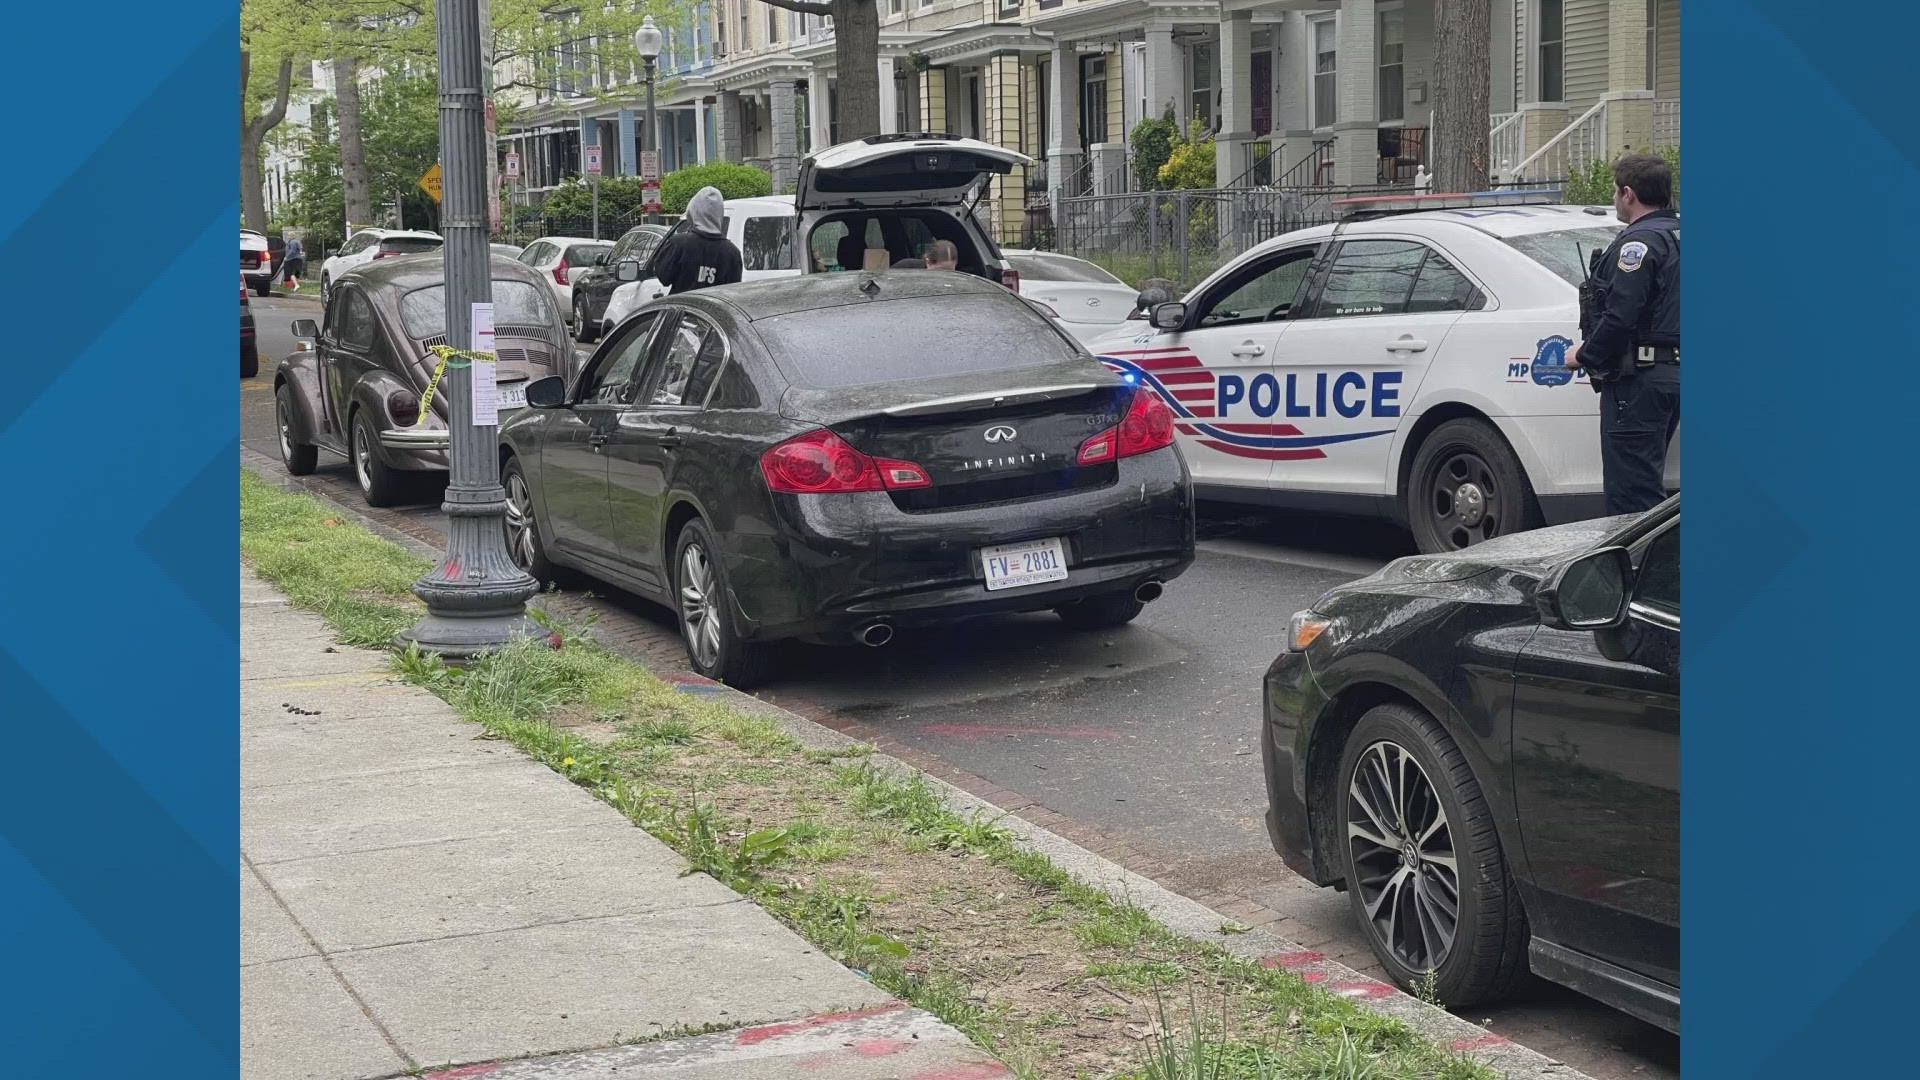 Four men are in the hospital after a shooting in Northeast D.C. Friday afternoon. Officers say they have recovered the vehicle thought to be involved in the shooting